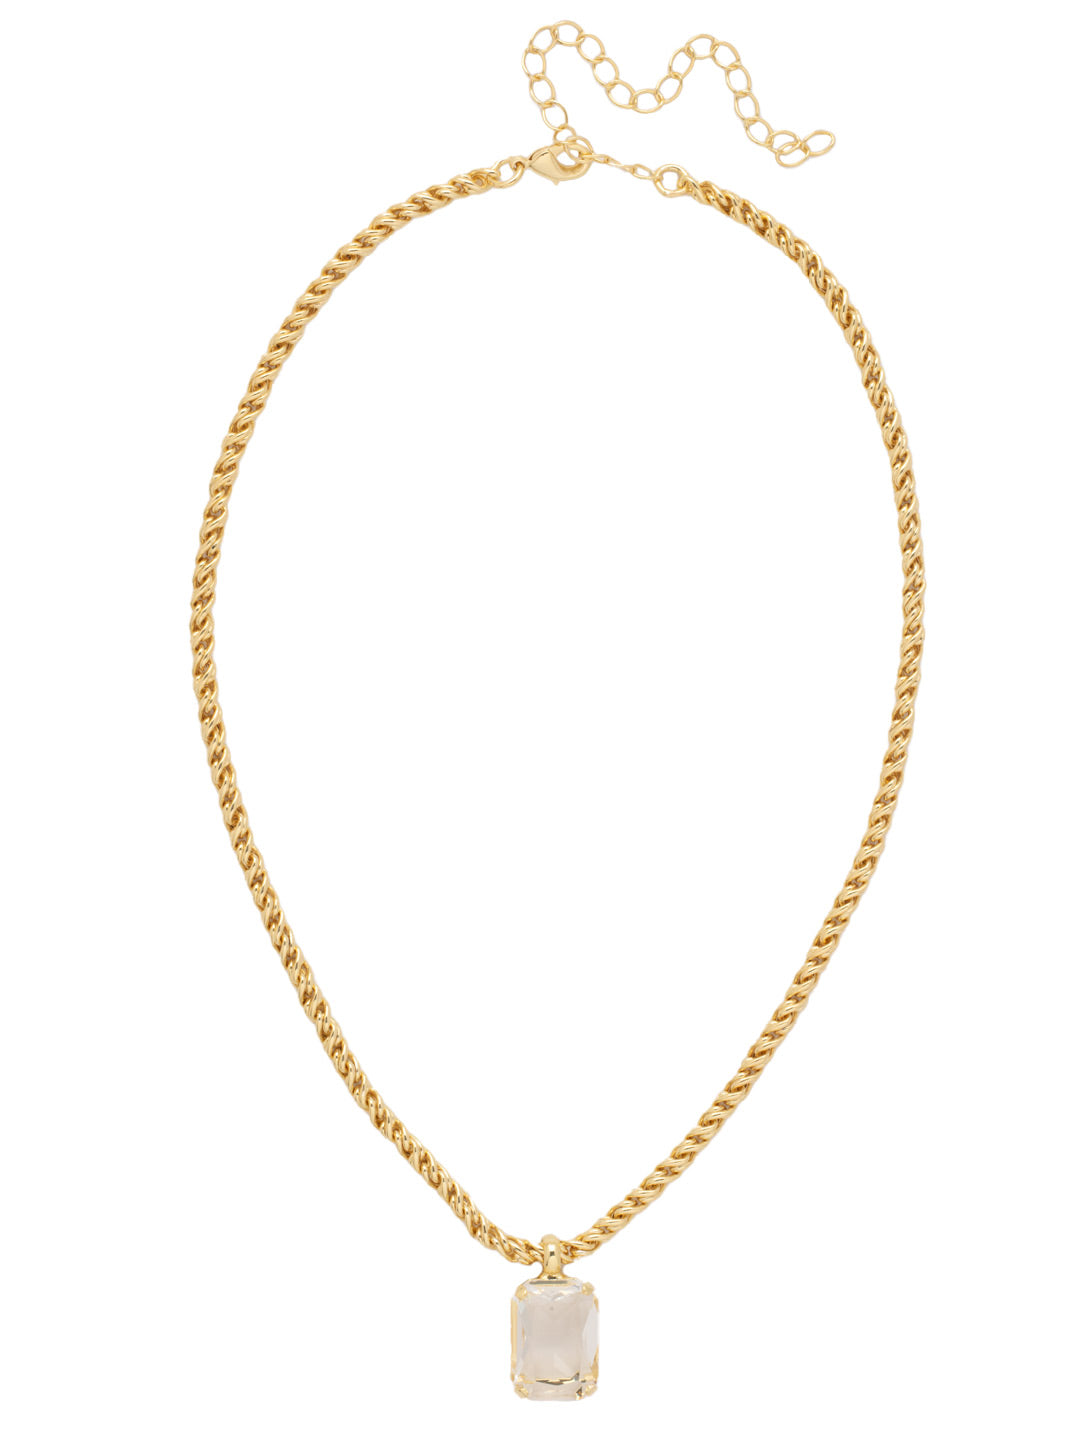 Kathleen Pendant Necklace - NFF8BGCRY - <p>The Kathleen Pendant Necklace features a trendy emerald cut candy gem on an adjustable rope chain, secured by a lobster claw clasp. From Sorrelli's Crystal collection in our Bright Gold-tone finish.</p>